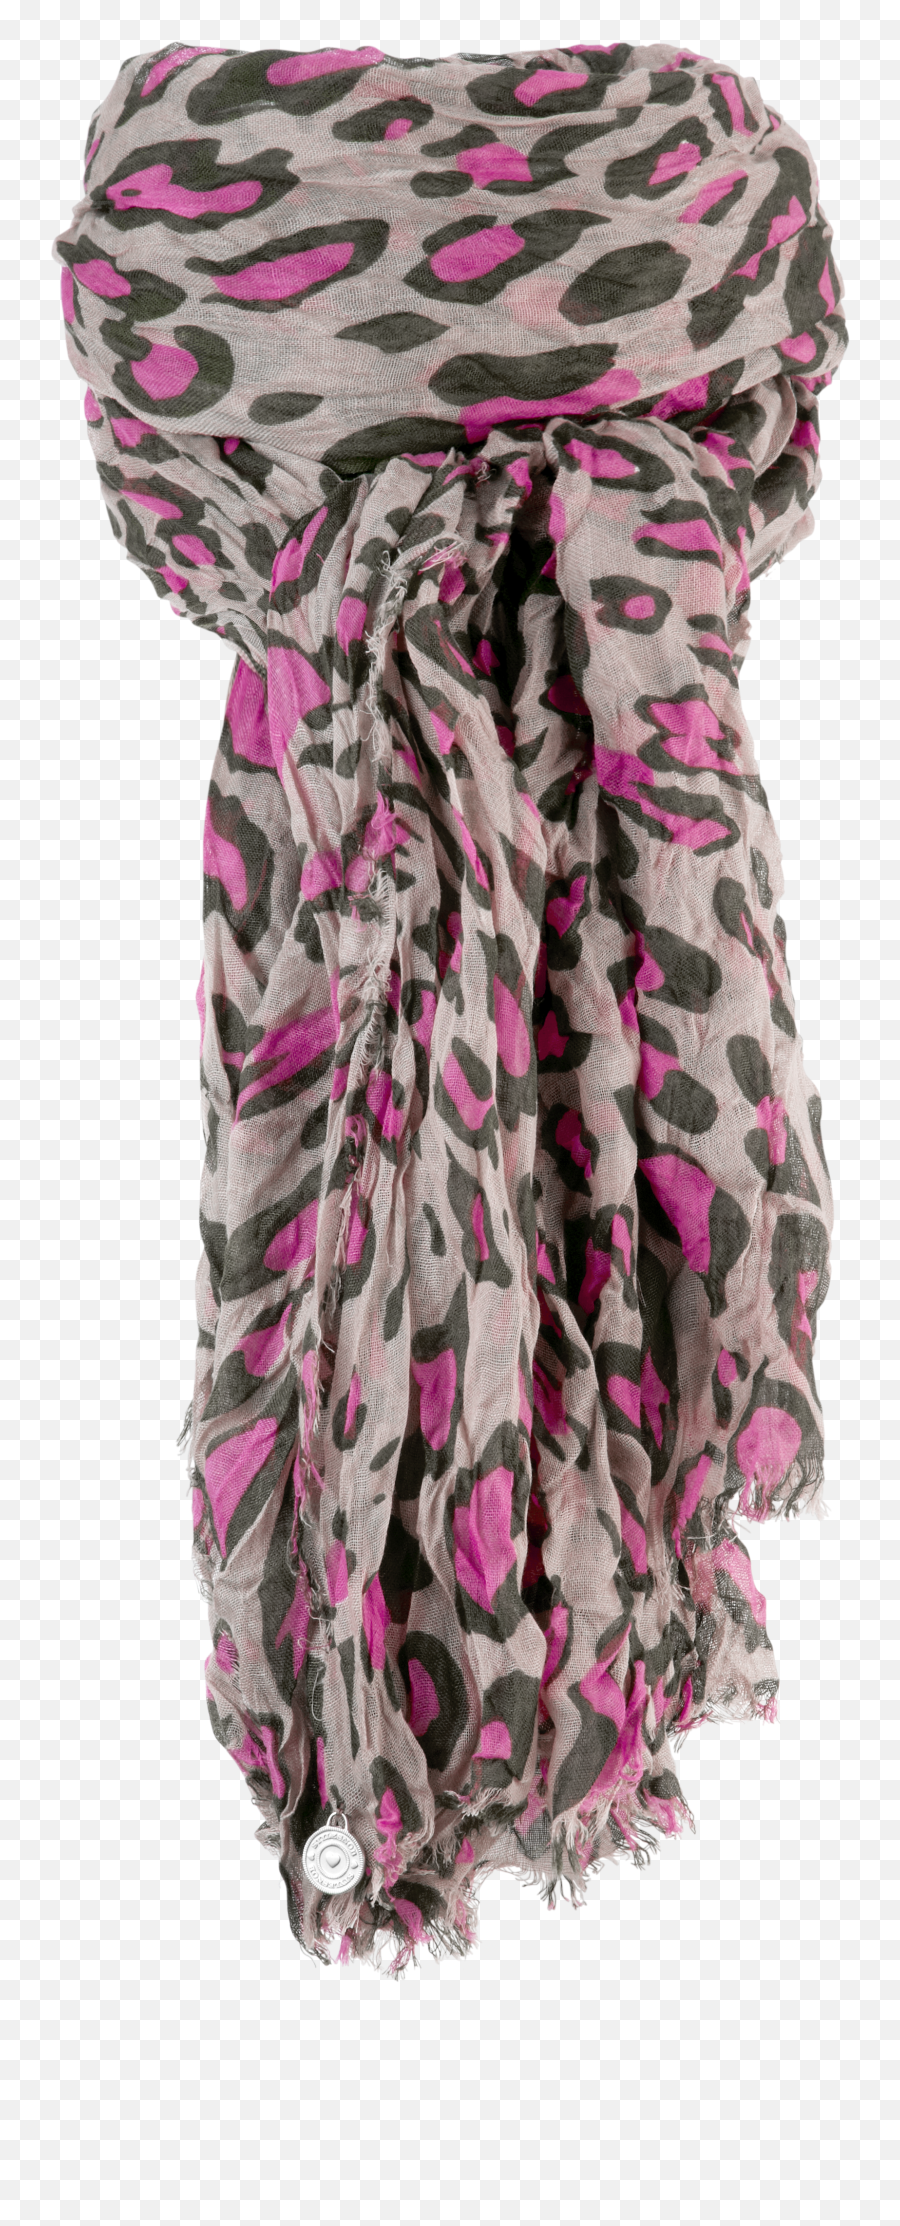 Scarf Png - Day Dress,Scarf Transparent Background